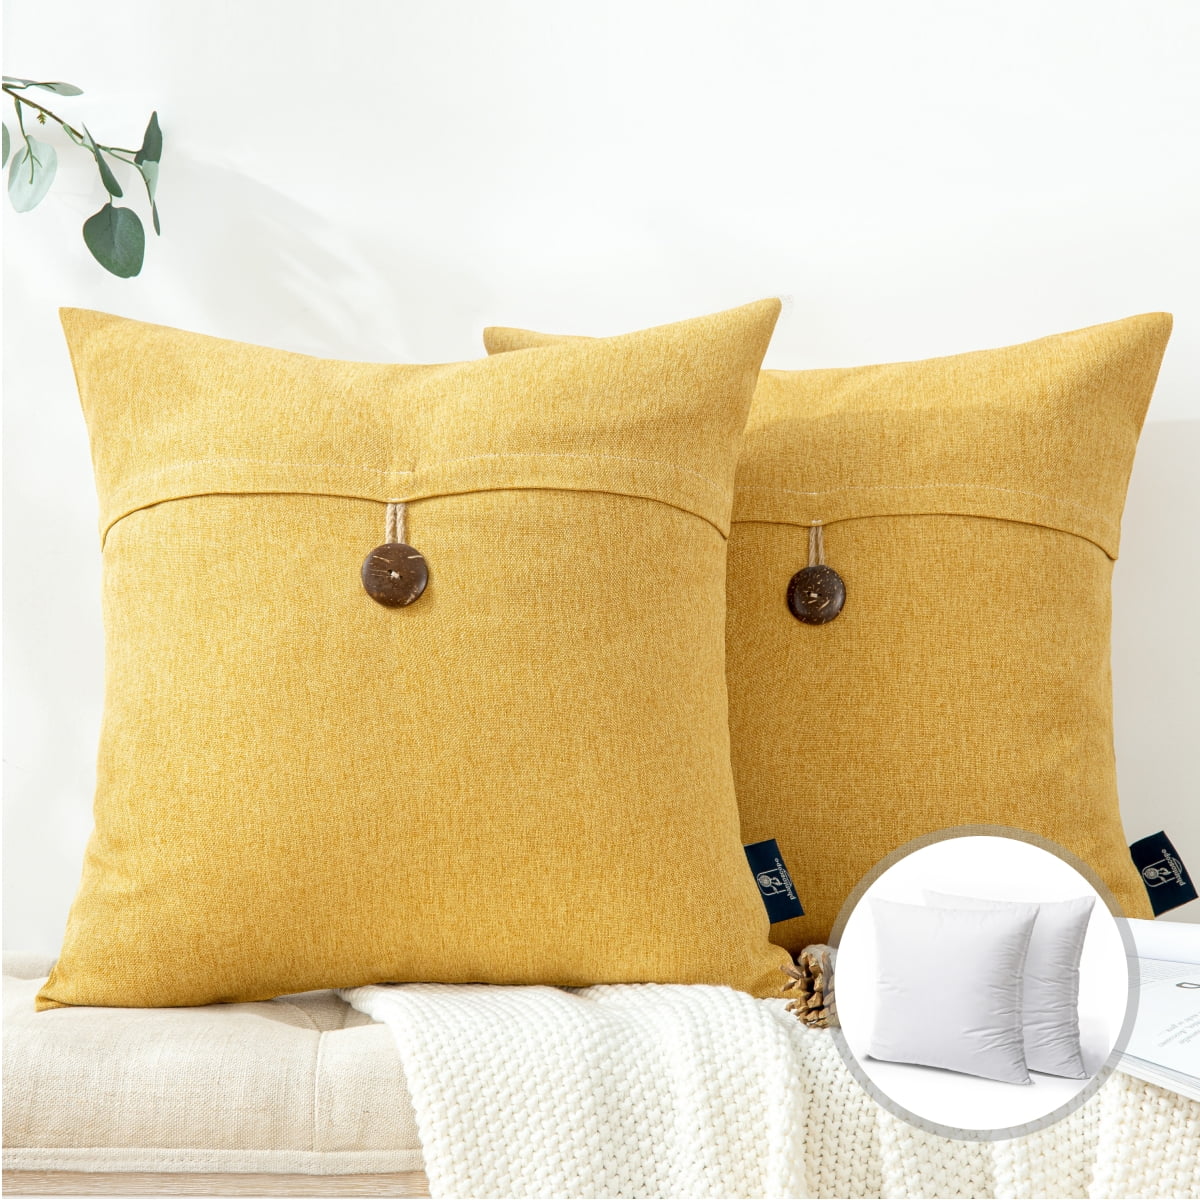 Single Button Series Farmhouse Square Decorative Polyester Throw Pillow Cusion for Couch, 18 inch x 18 inch, Yellow, 2 Pack